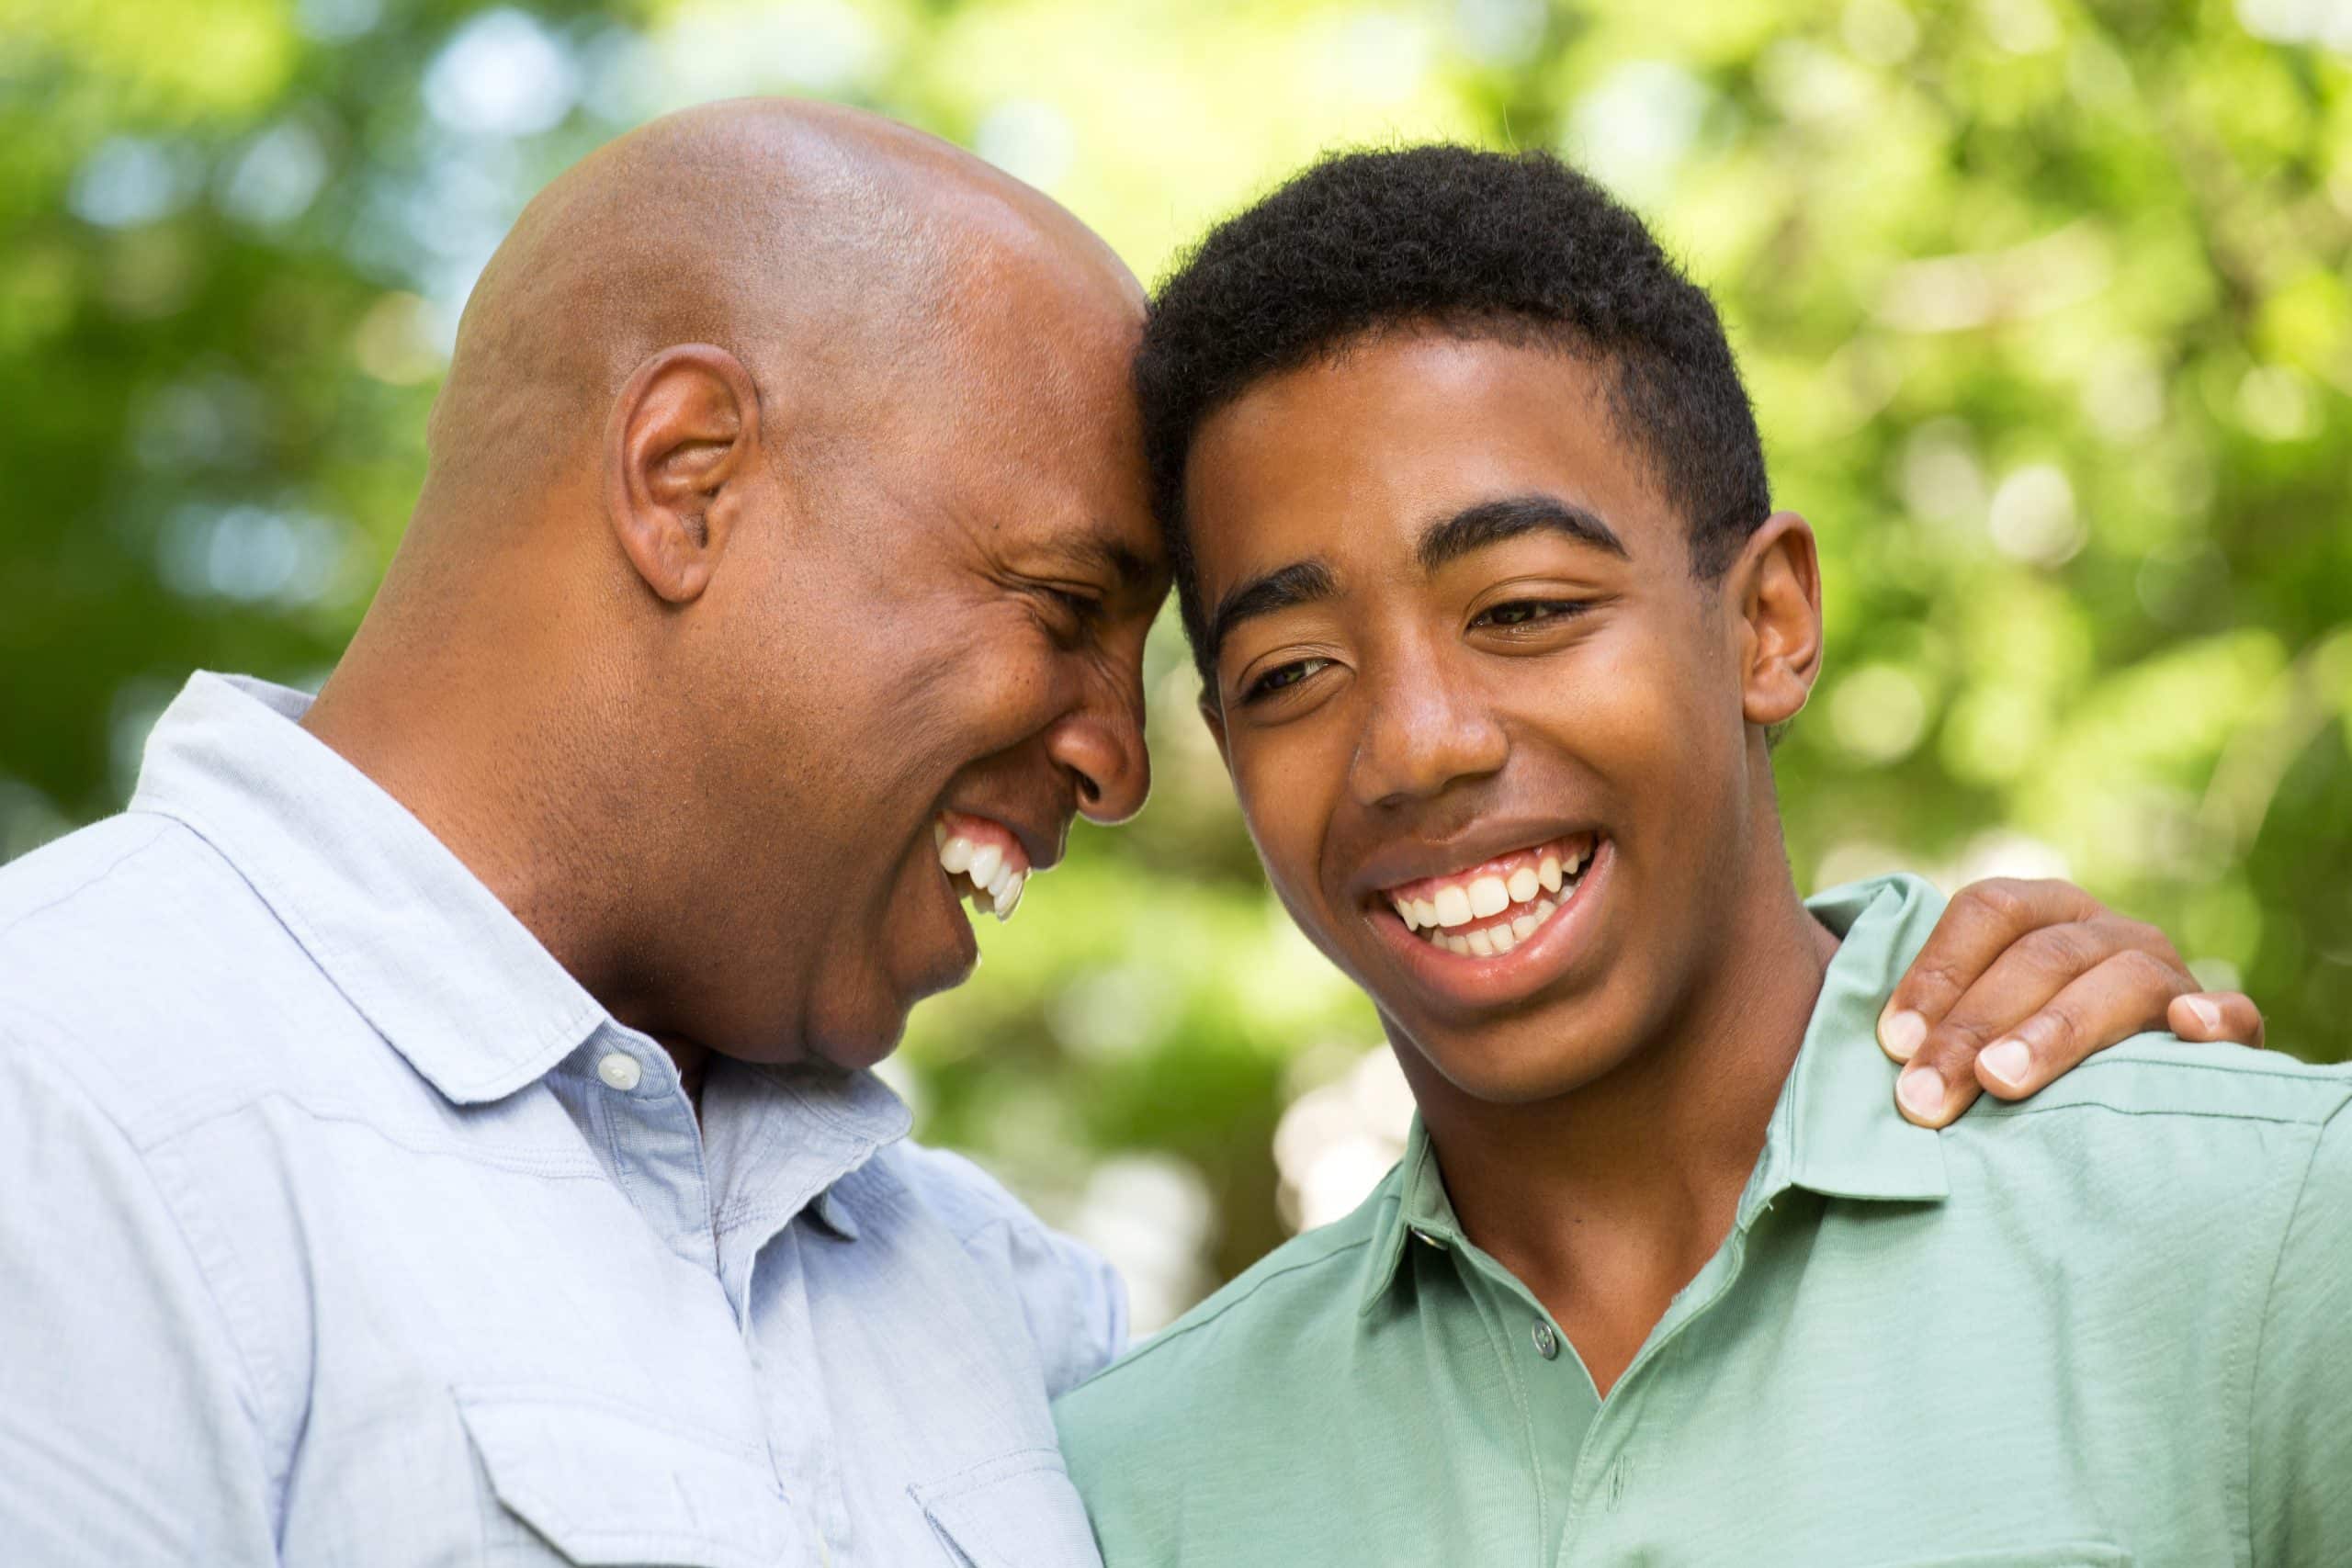 A foster parent spends time with a teen in foster care.